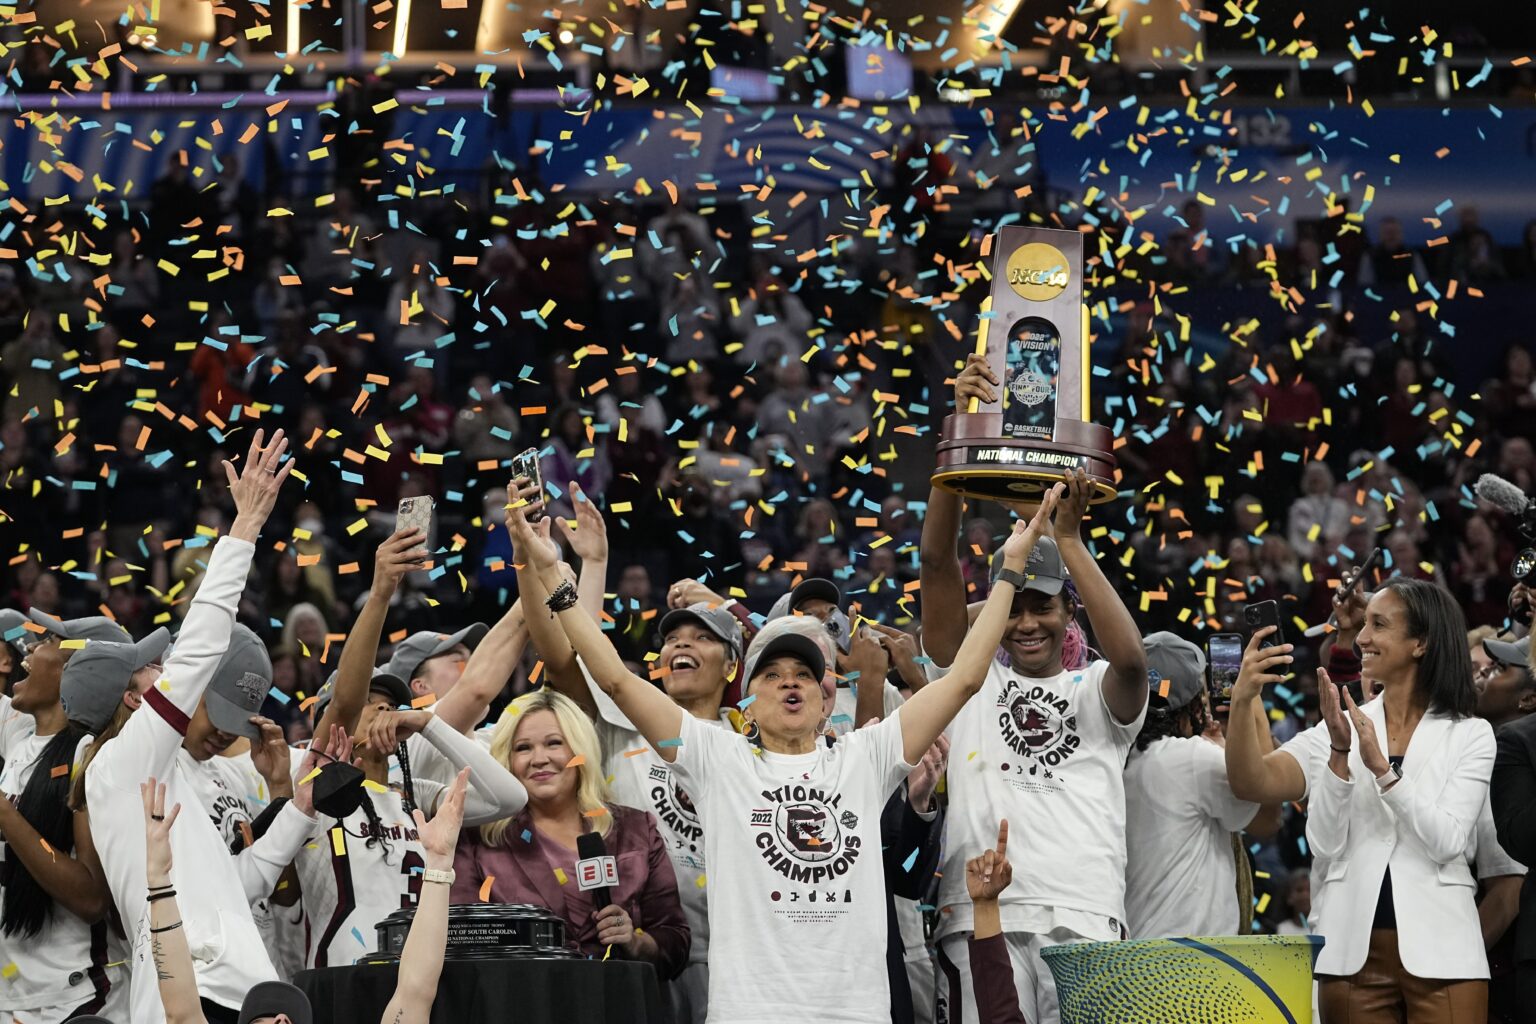 South Carolina head coach Dawn Staley celebrates with her team after a college basketball game in the final round of the Women's Final Four NCAA tournament against UConn Sunday